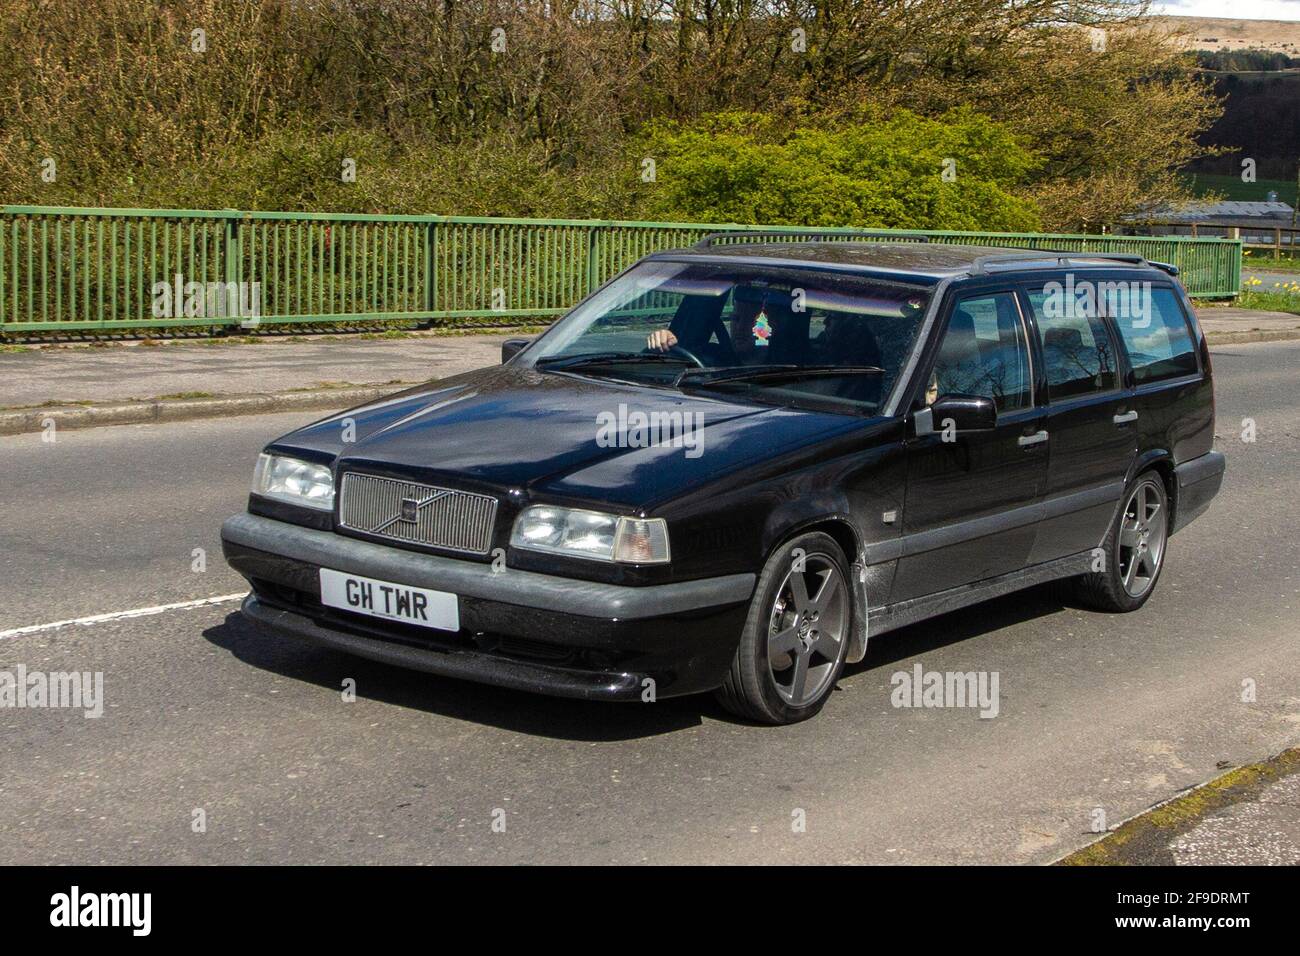 1995 90s nineties blue Volvo 850 T5R 2310 cc estate car; Moving vehicles, cars, vehicle driving on UK roads, motors, motoring on the M6 English motorway road network Stock Photo